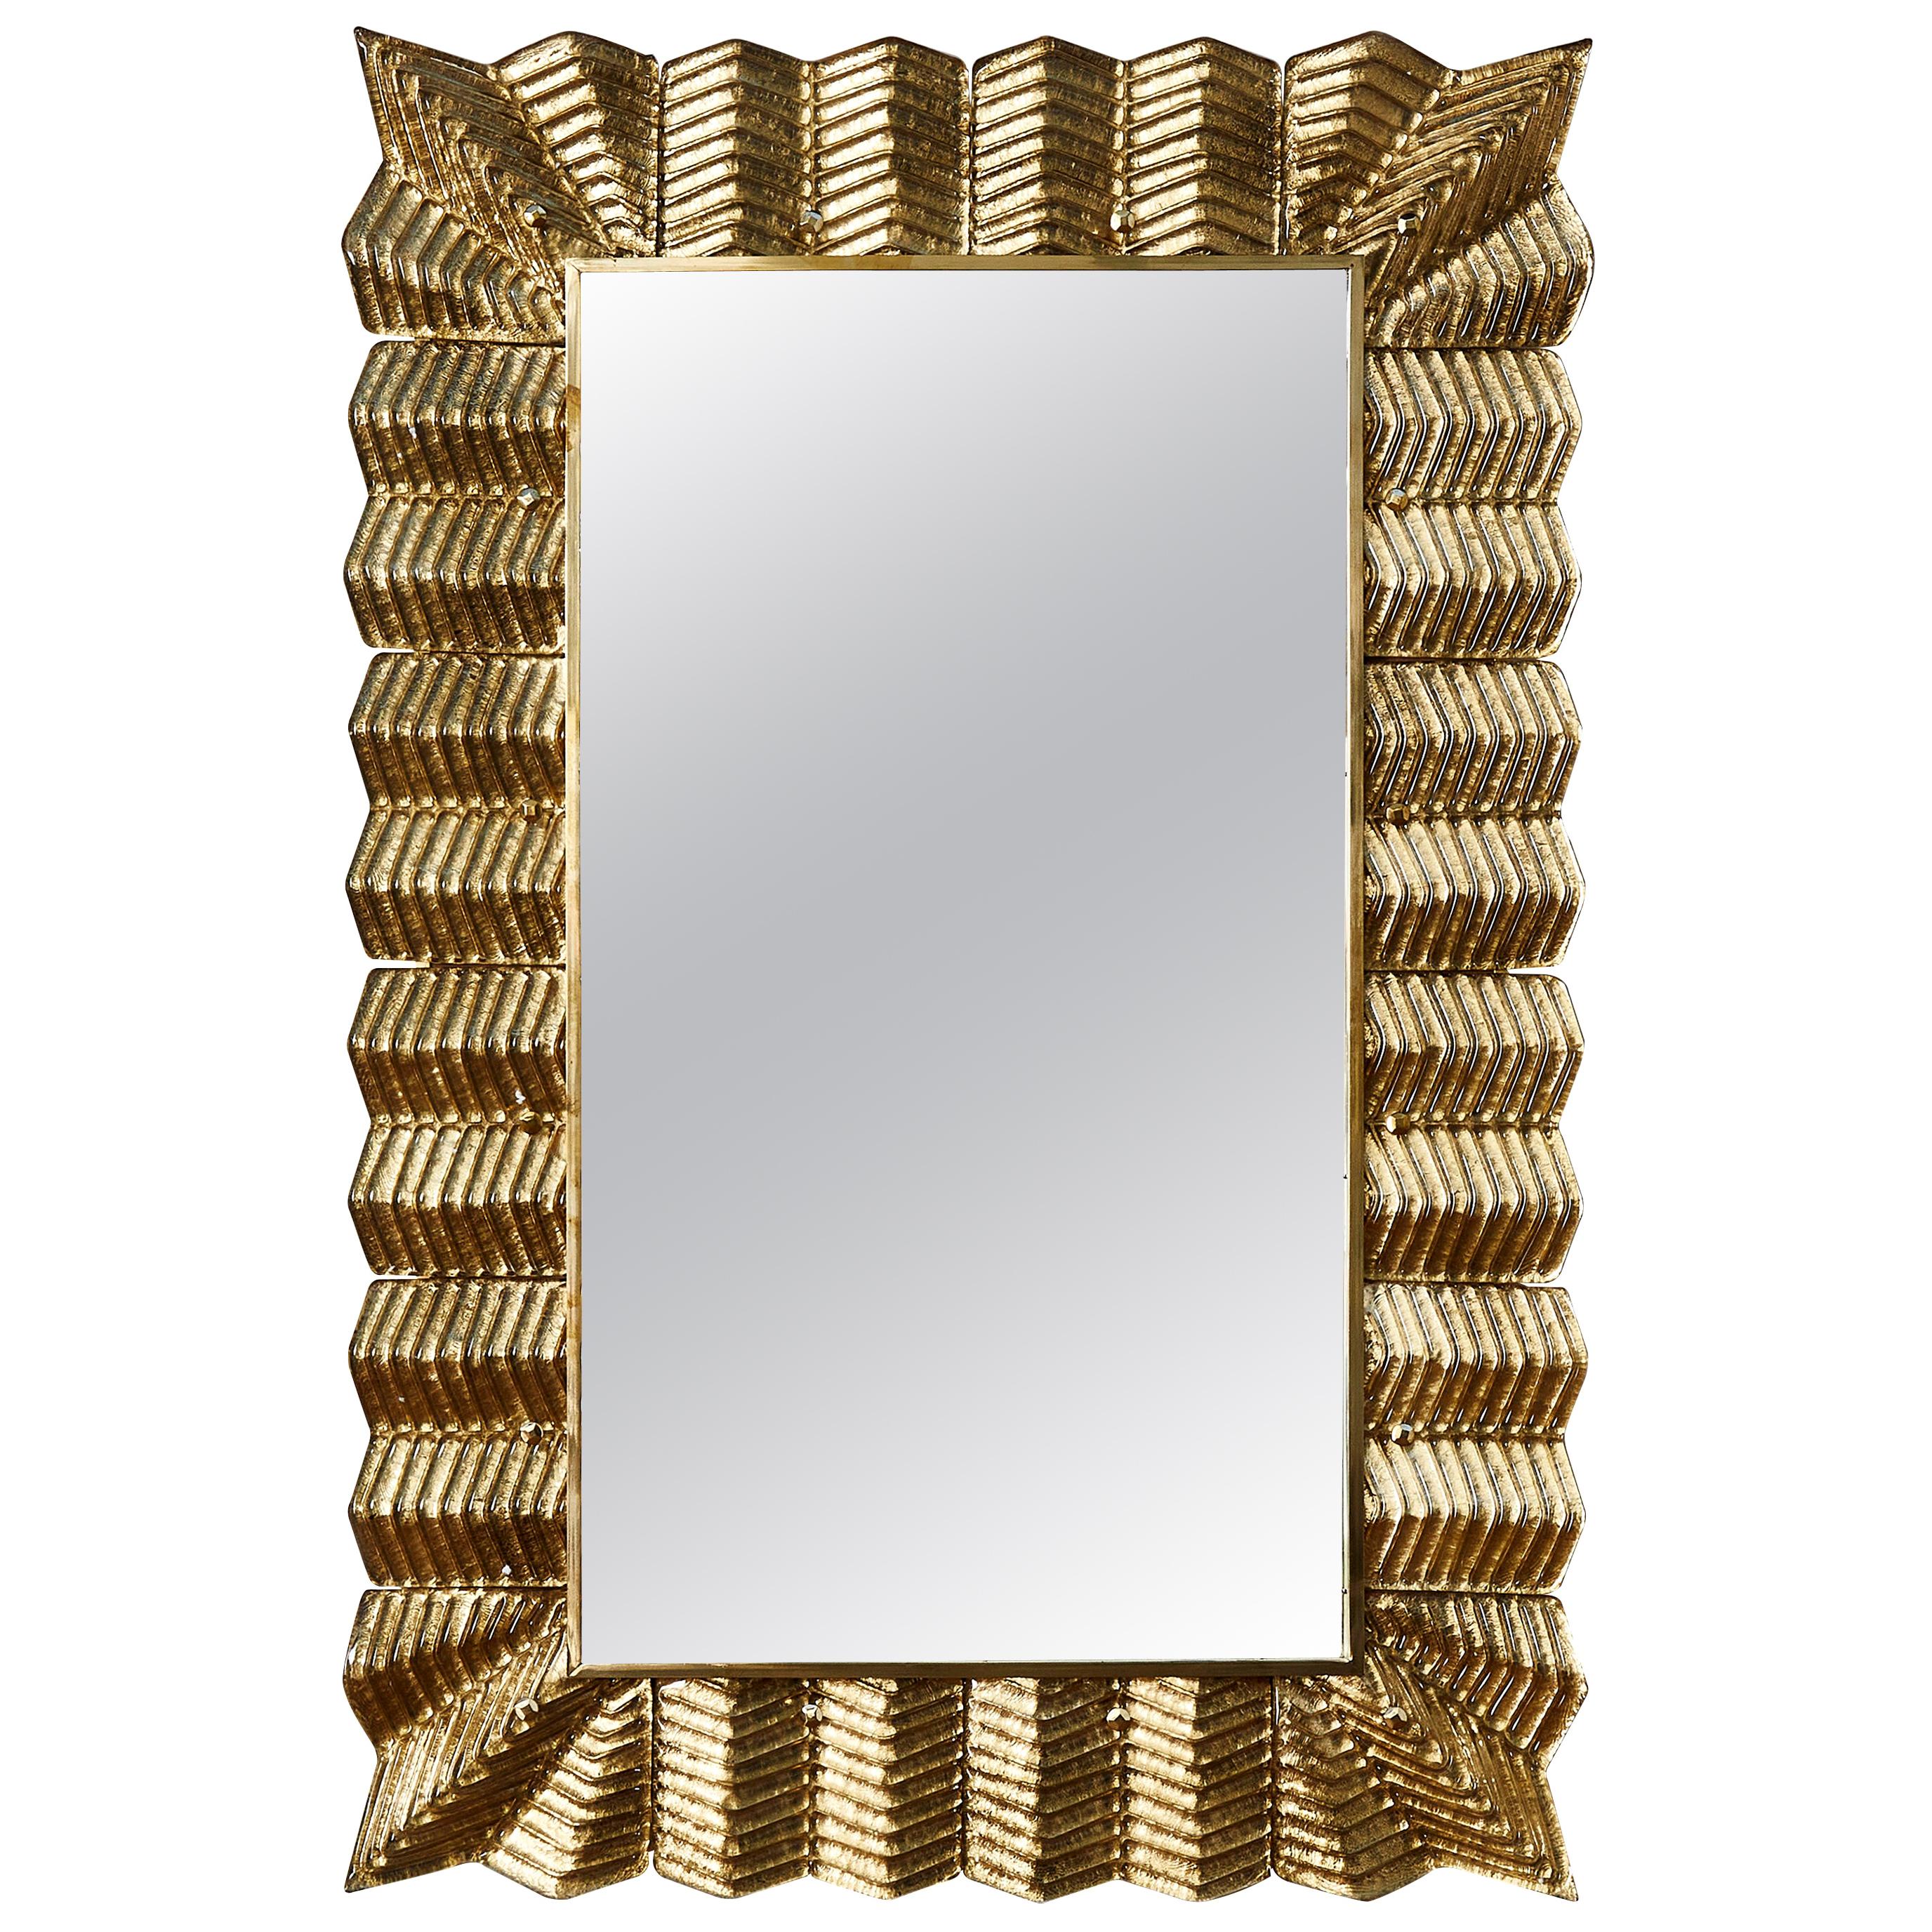 Mirror with a Golden Murano Glass Frame, by Studio Glustin